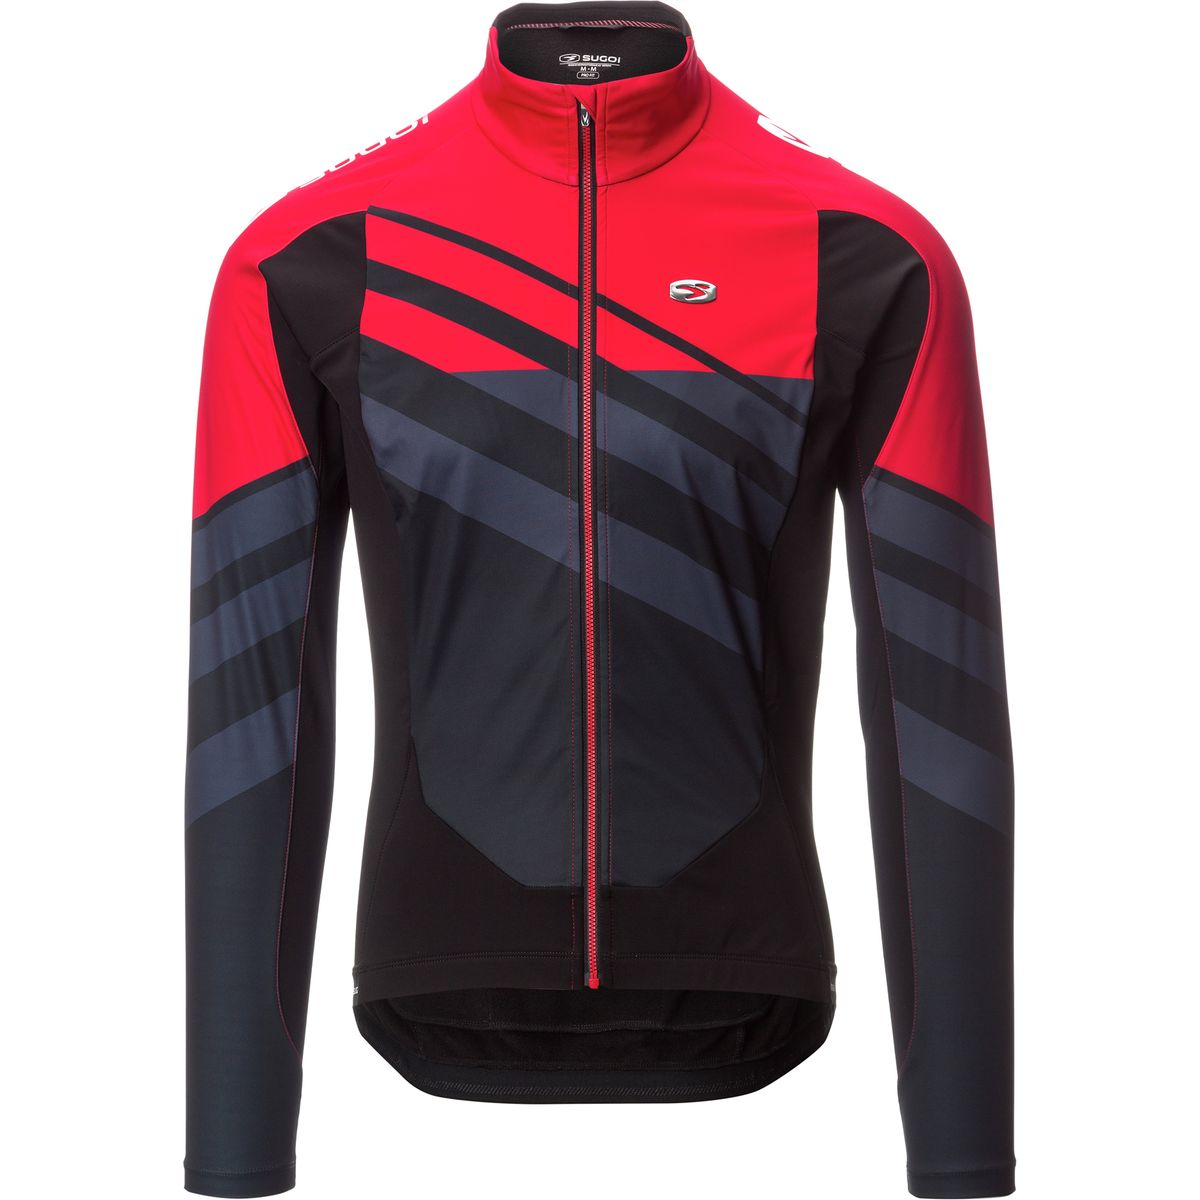 SUGOi RS Zero Long Sleeve Jersey Mens